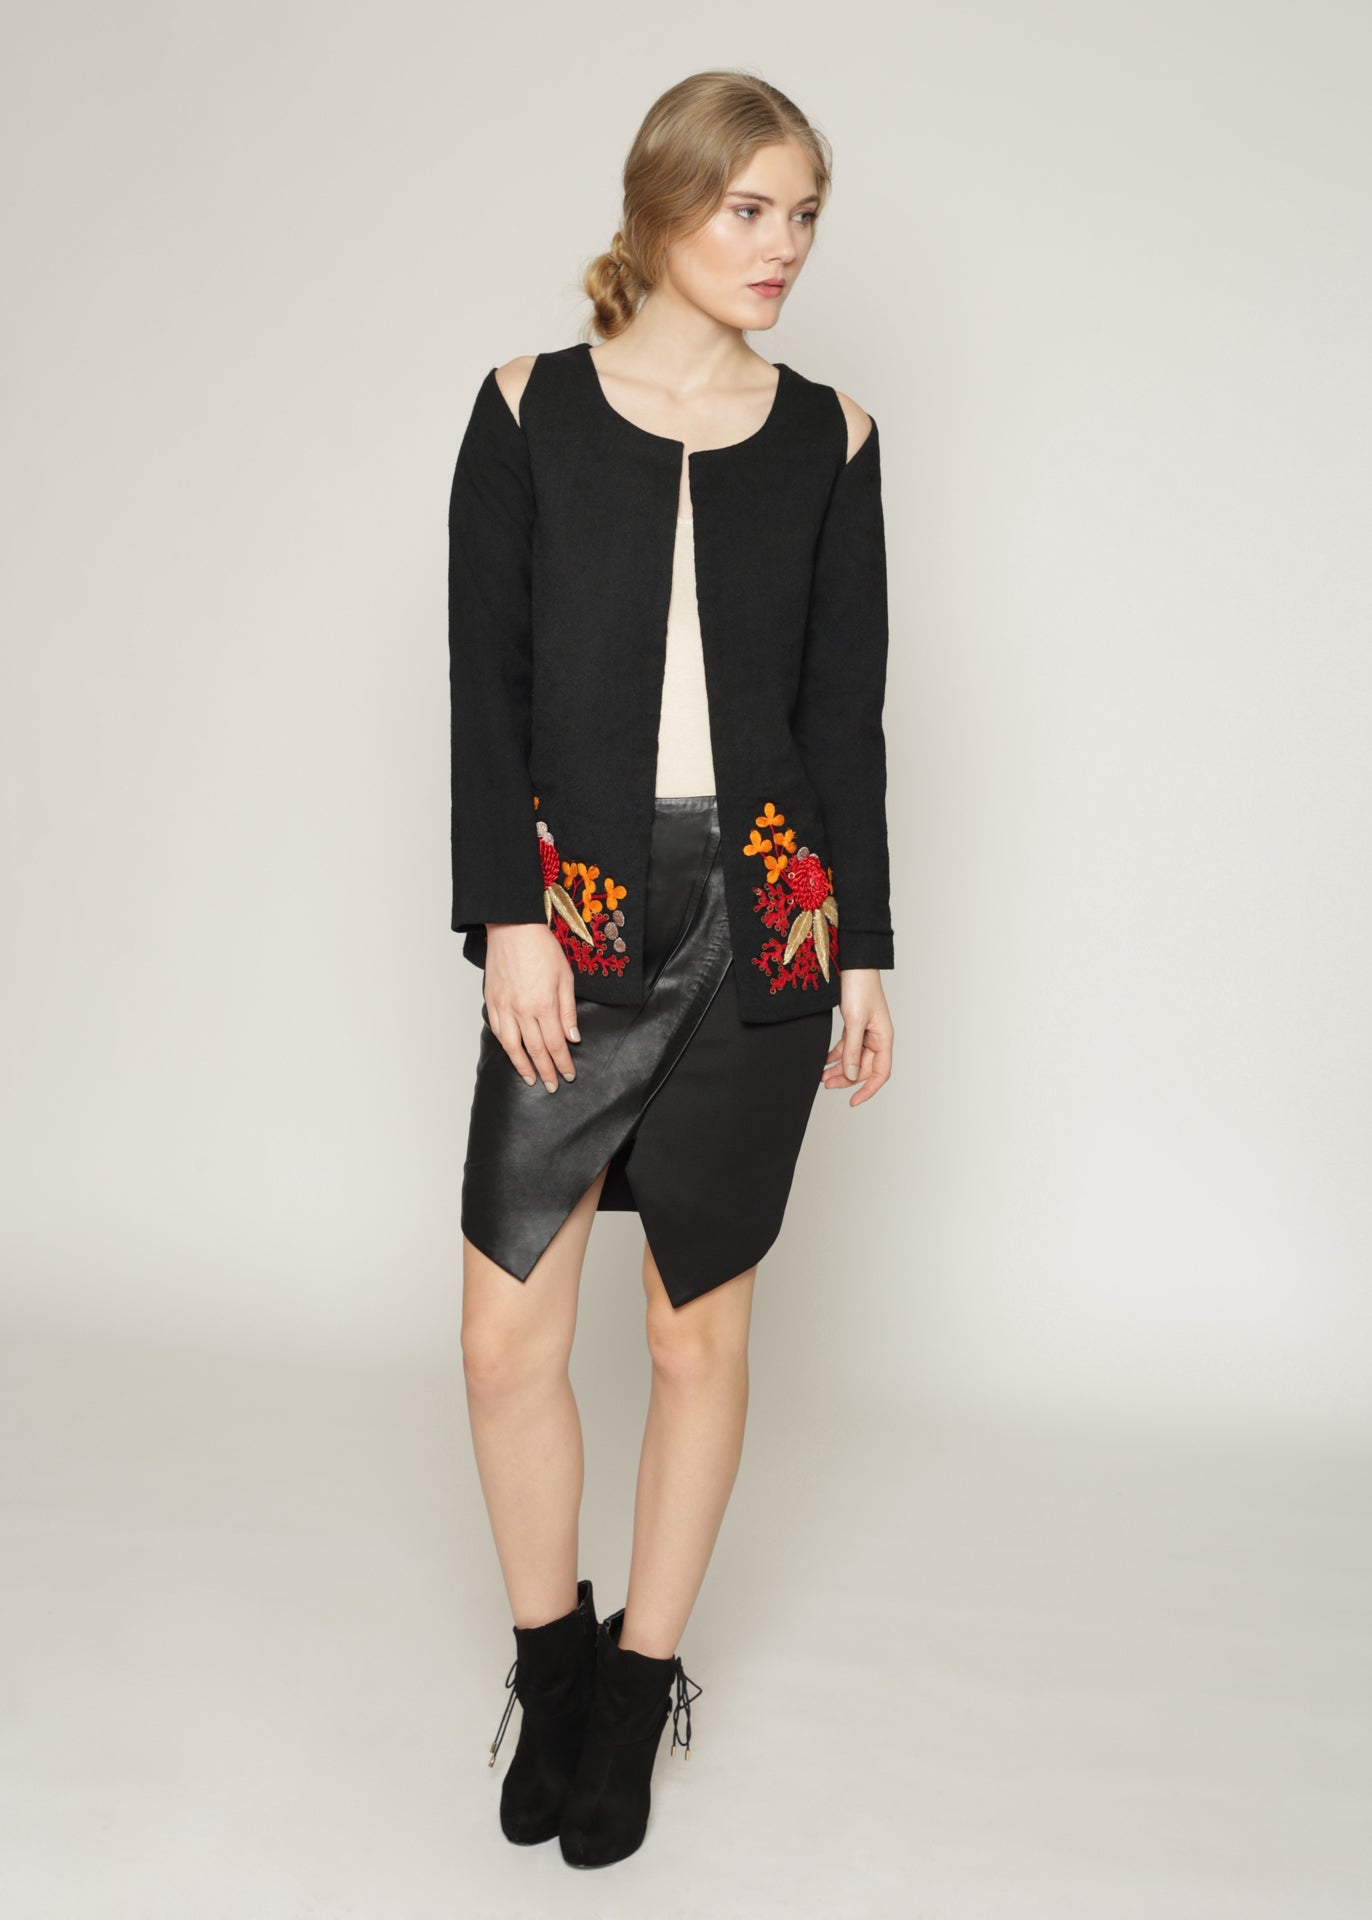 Wool jacket with cutout shoulders and embroidery details